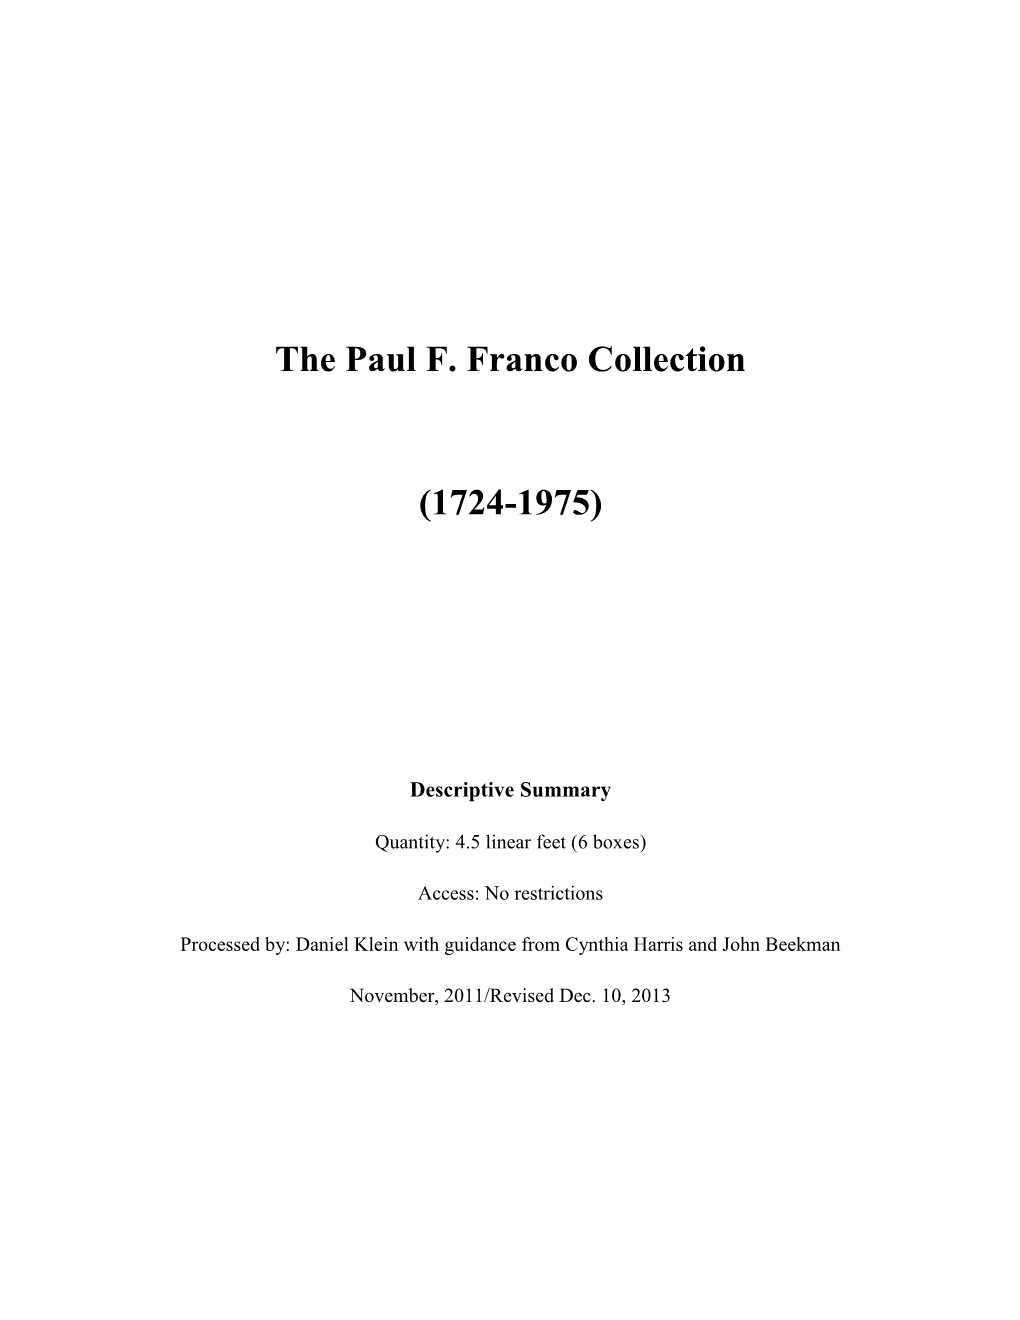 The Paul F. Franco Collection(1724-1975)